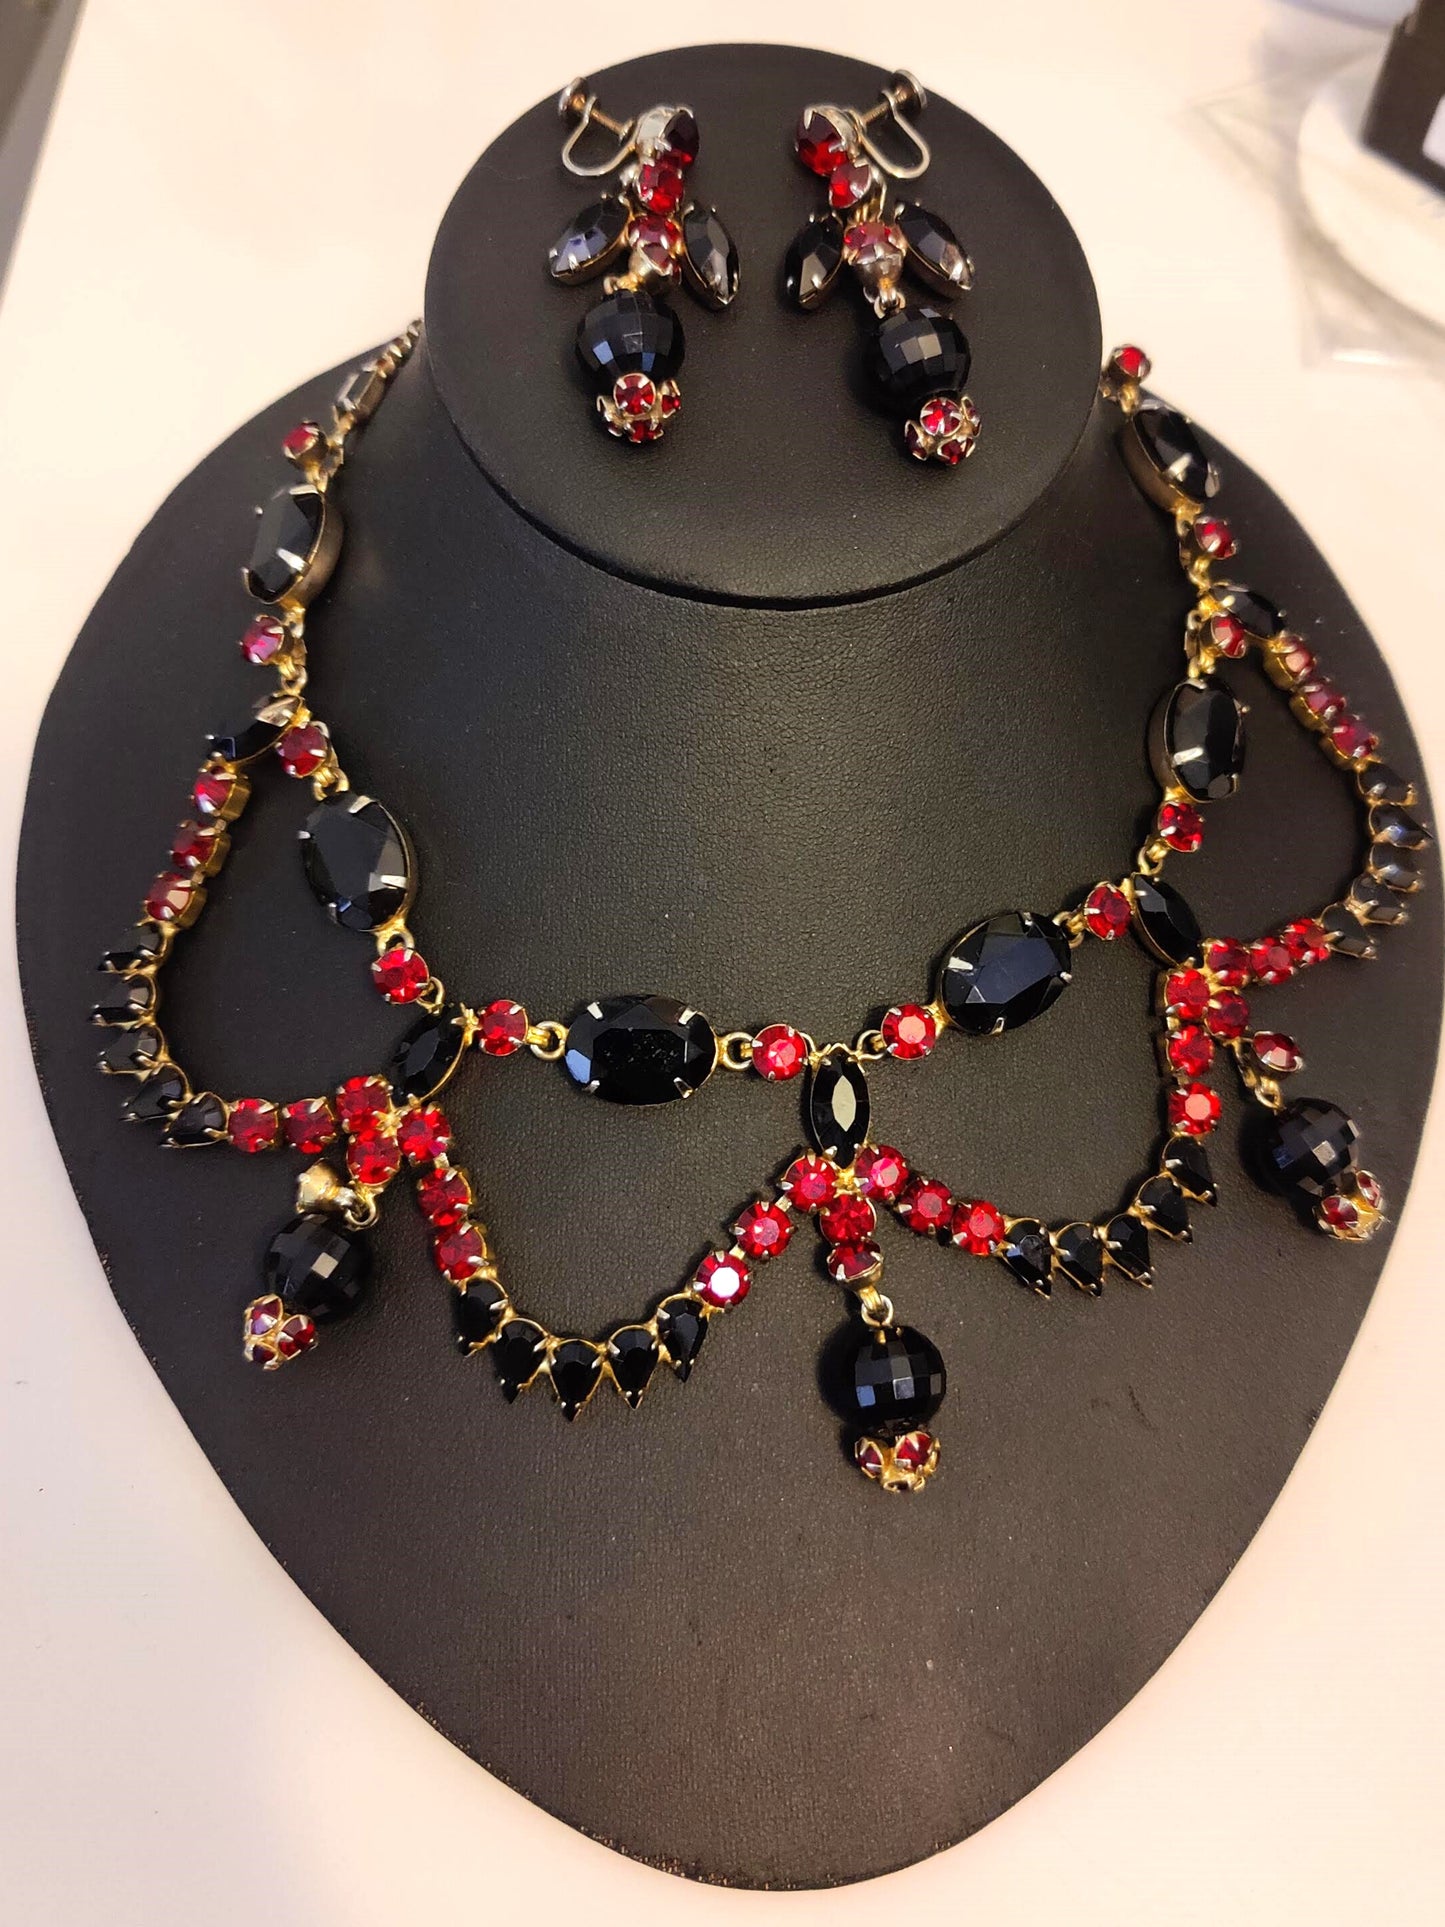 Vintage Blood Red Prong-Set Faceted Glass Stones Necklace and Earrings Set